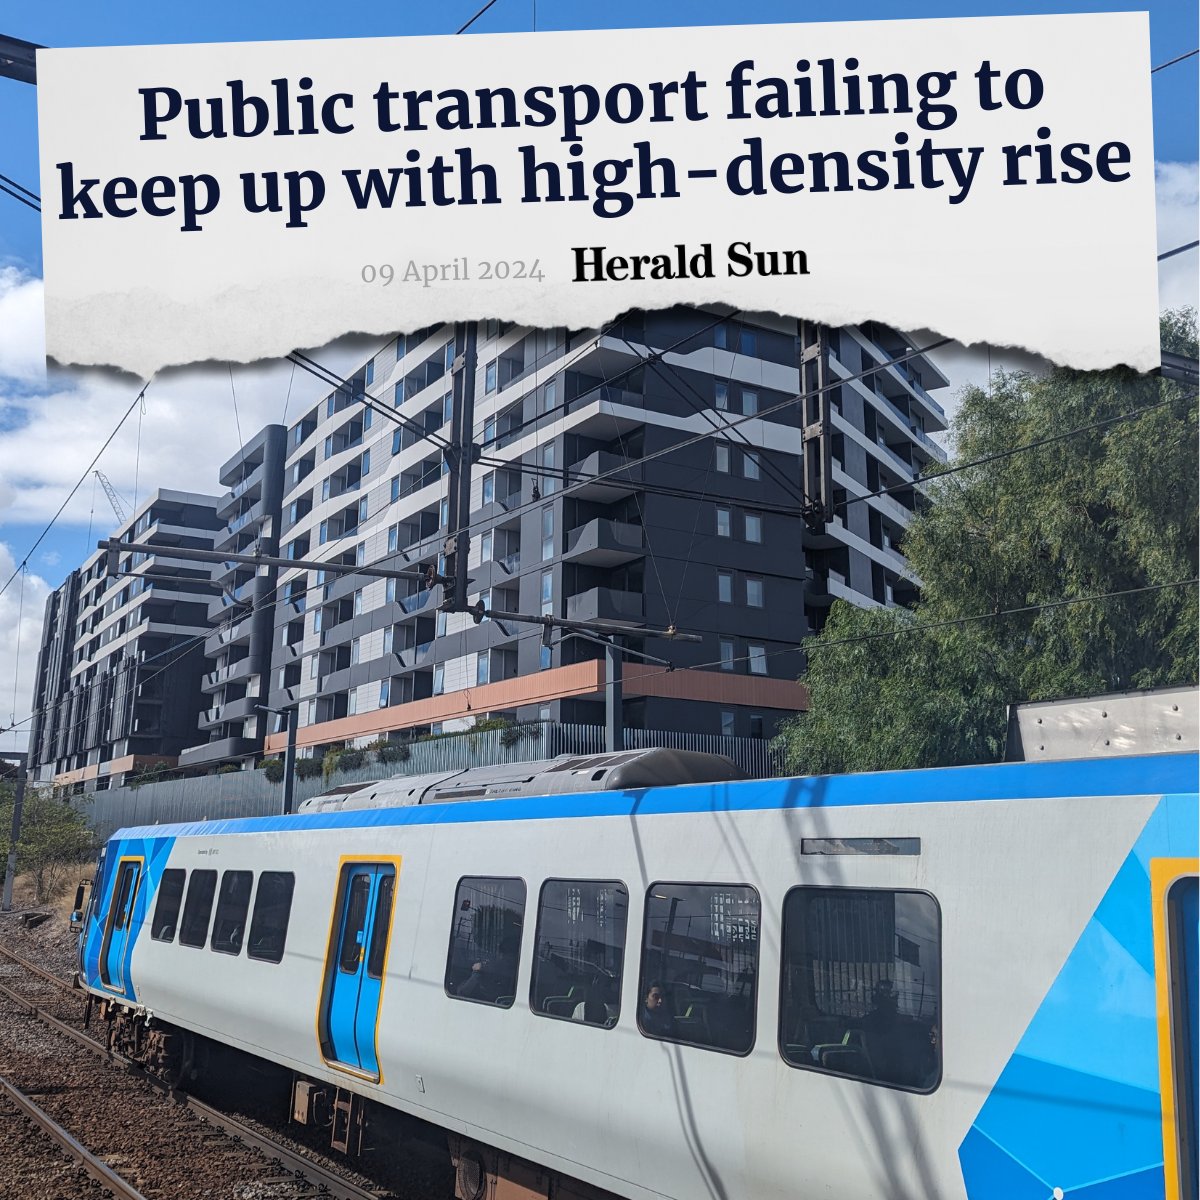 We need increased public transport services to reduce car dependence, pollution & transport emissions. But in many places, service levels aren’t keeping pace with community need, let alone getting ahead. Services on all lines need to run more often, especially at off-peak times.